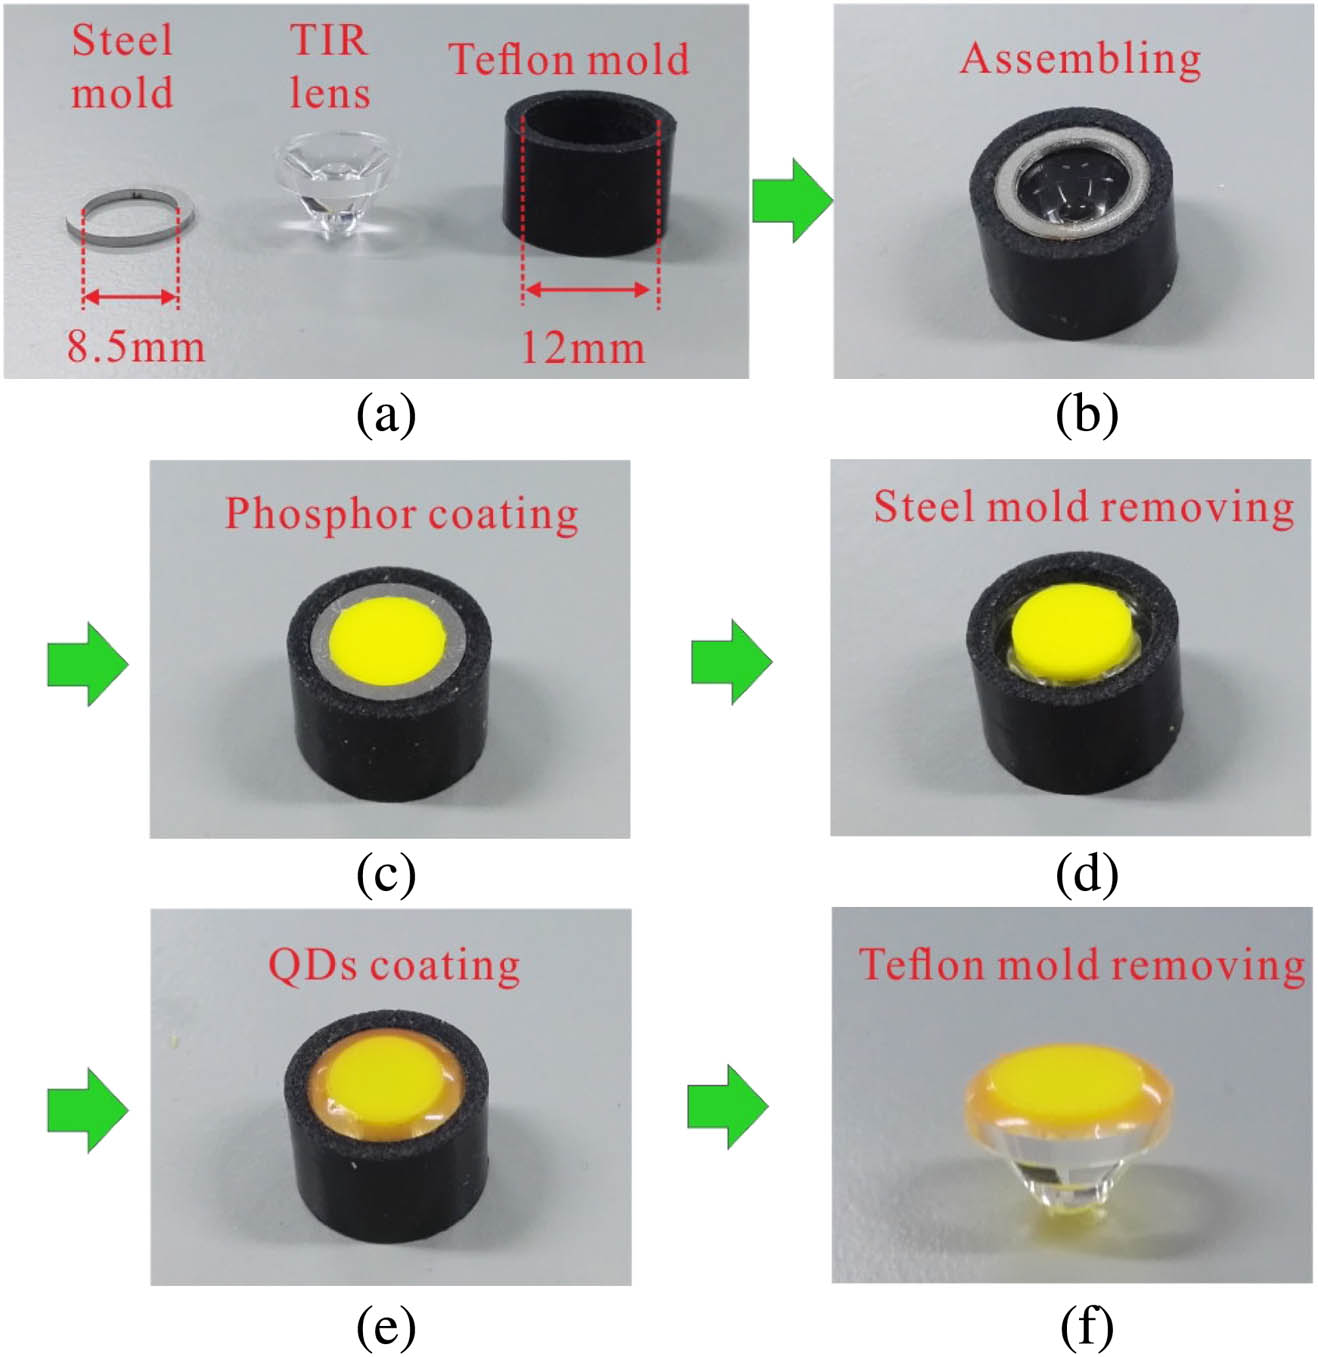 Fabrication process of horizontally layered quantum dots phosphor nanocomposite (QDs-outside type): (a) molds and TIR lens, (b) parts assembling, (c) phosphor coating, (d) steel mold removing, (e) QDs coating, and (f) Teflon mold removing.